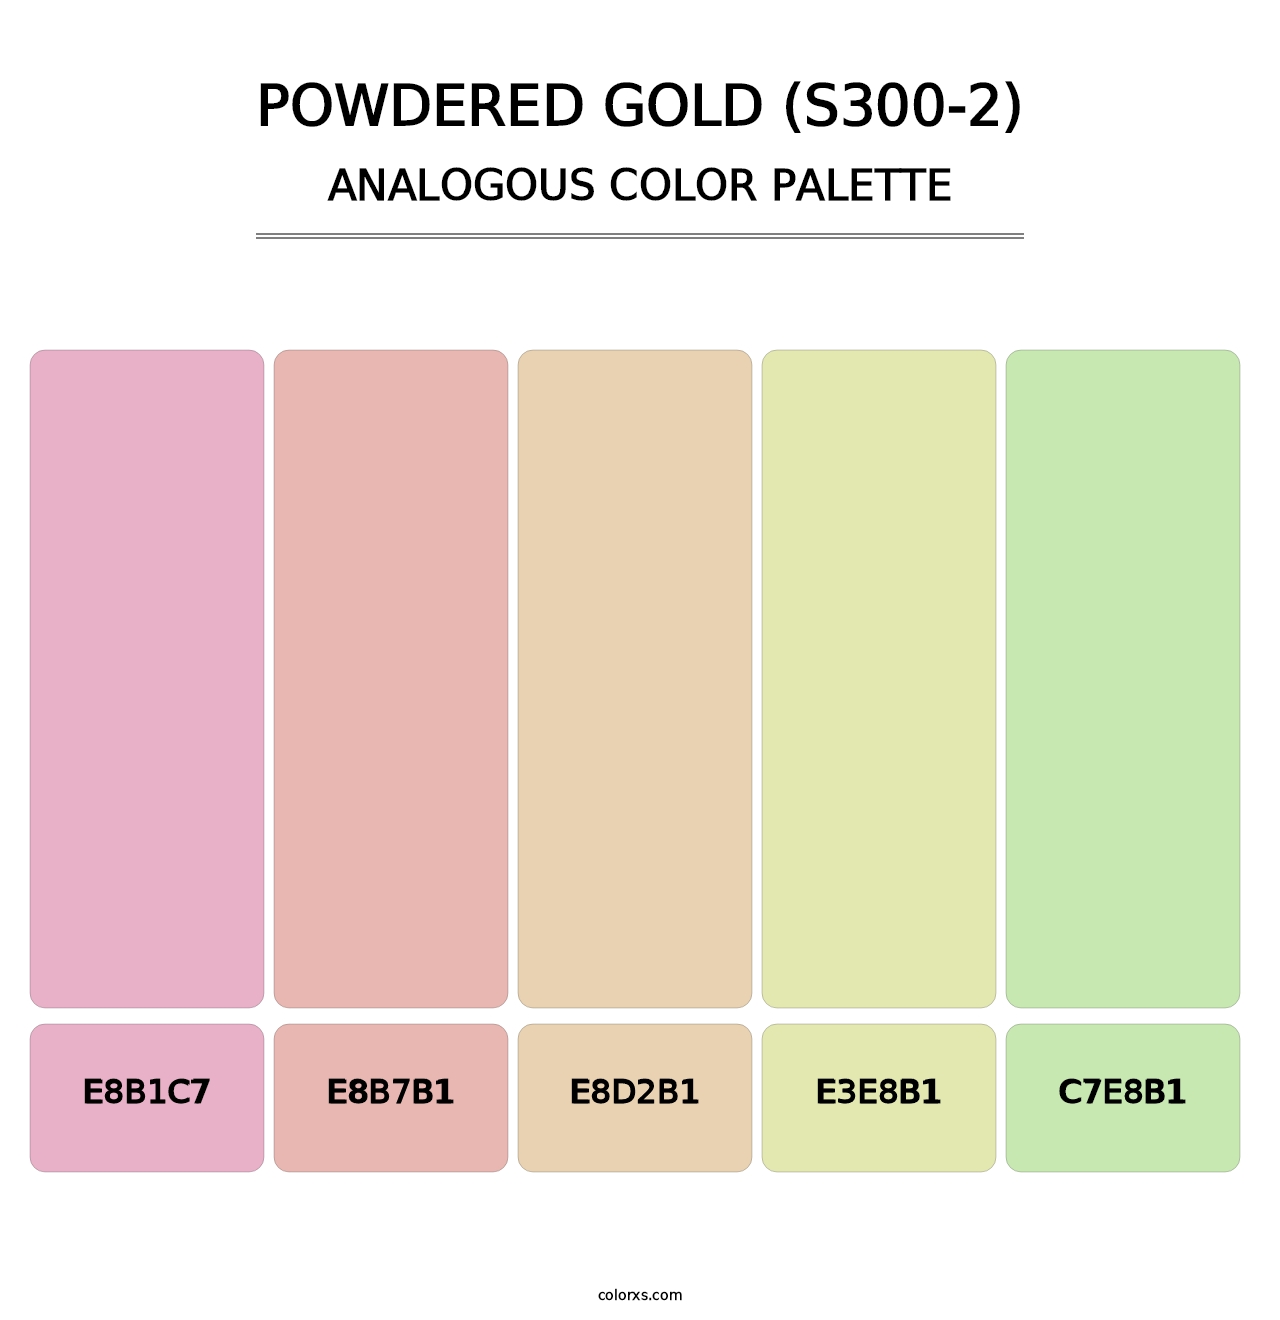 Powdered Gold (S300-2) - Analogous Color Palette